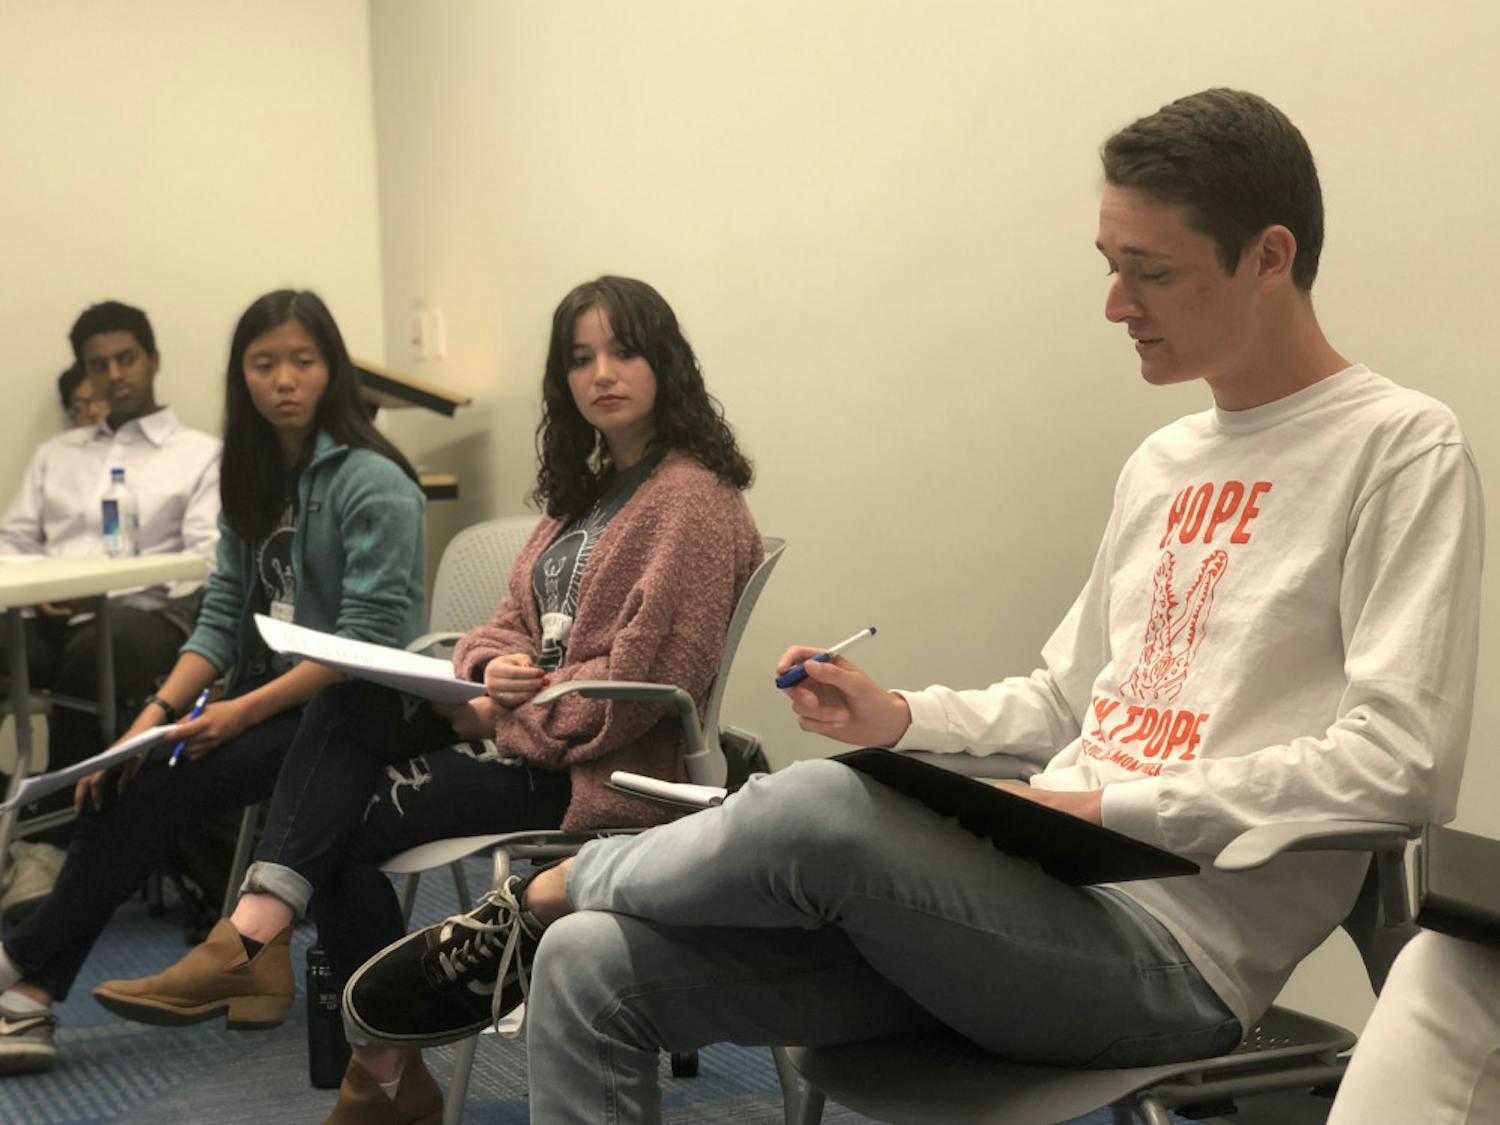 Candidates Emma Sanchez (left), Zoe Terner (middle) and Nick Meyer (right) deliver their closing remarks at a debate between Inspire and Gator parties‘ liberal arts and sciences candidates on Monday night.